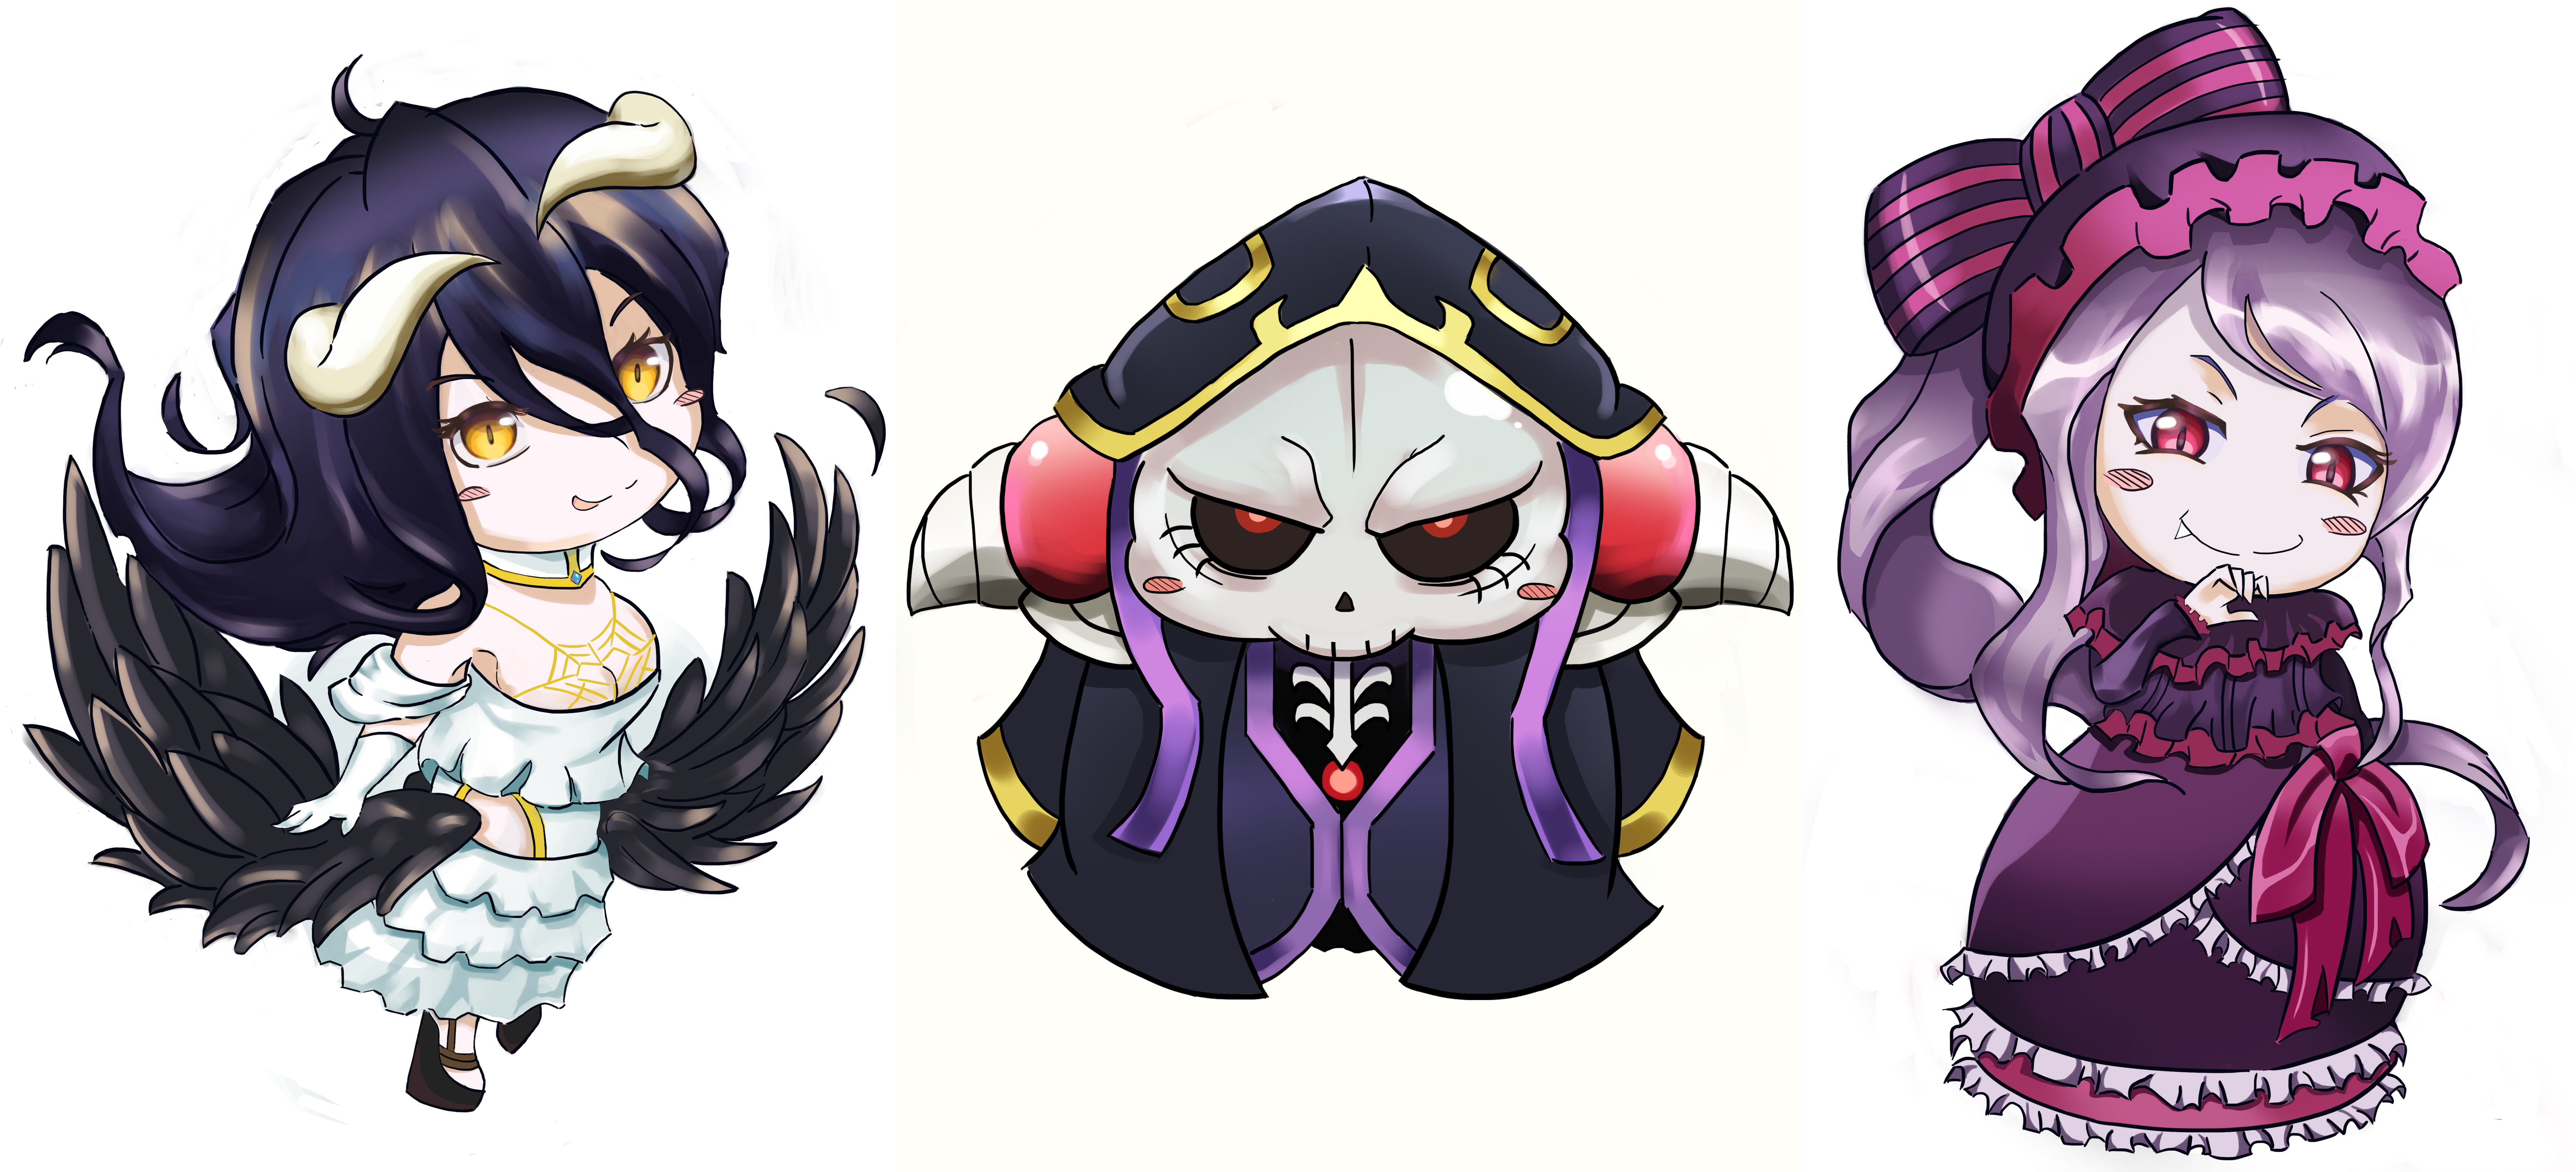 Overbooru Image 91 Character Ainz Ooal Gown Character Albedo Technical Grabber Unknown Overlord Unknown Anime Unknown Chibi Unknown Fanart Unknown オーバーロード アニメ Unknown シャルティア ブラッドフォールン